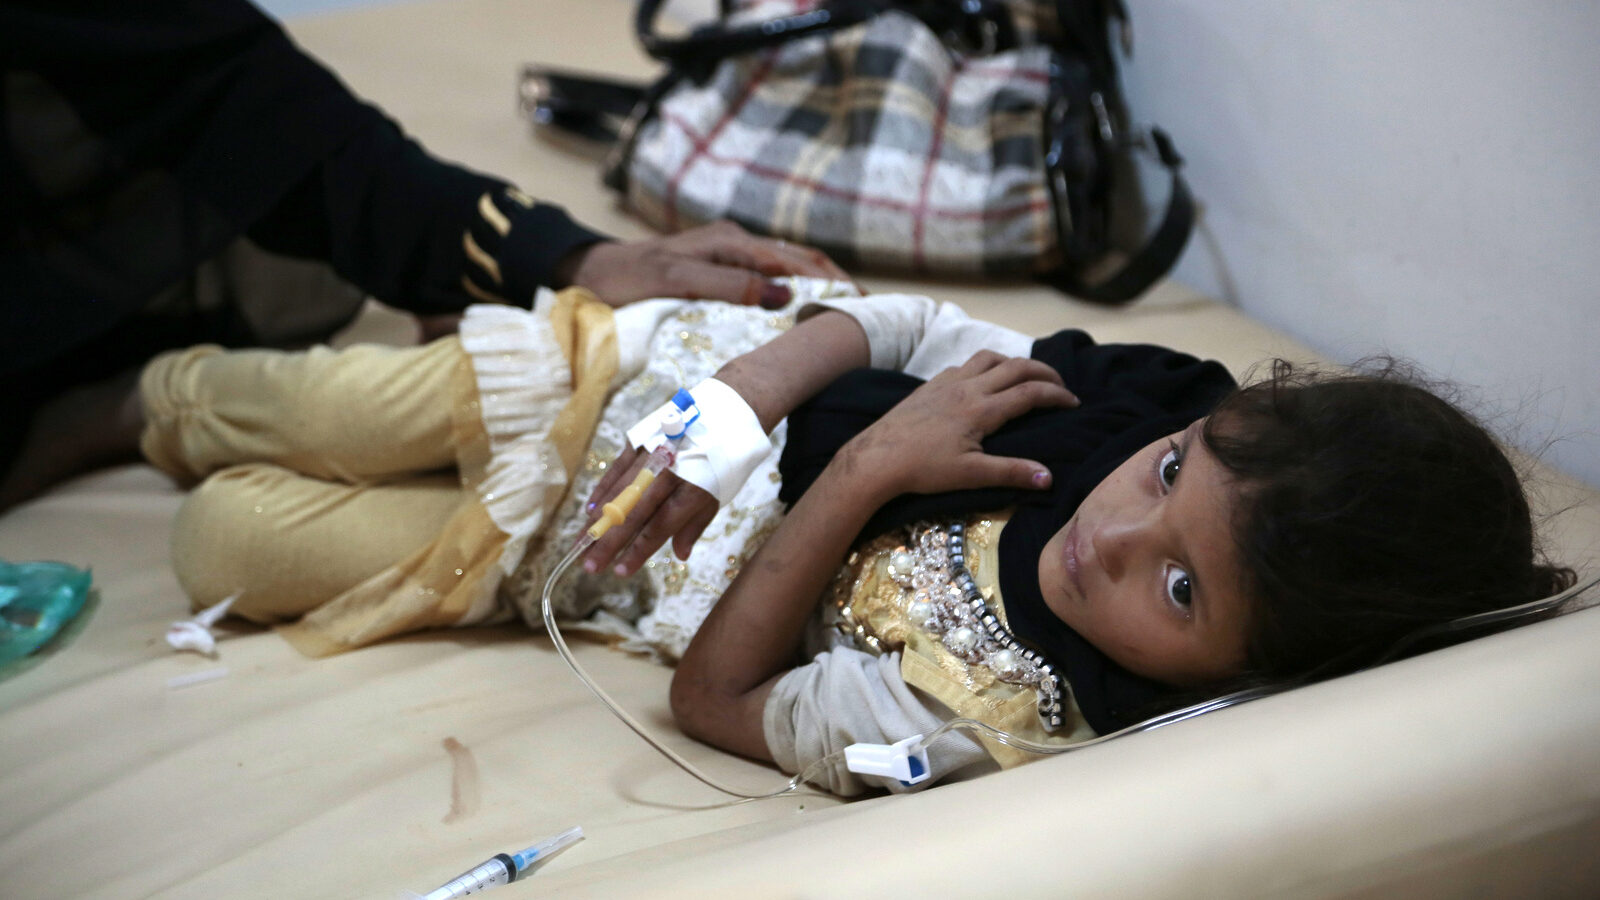 A girl is treated for a suspected cholera infection at a hospital in Sanaa, Yemen. The World Health Organization says a rapidly spreading cholera outbreak in Yemen has claimed thousands of lives since April and is suspected of affecting 246,000 people. (AP/Hani Mohammed)